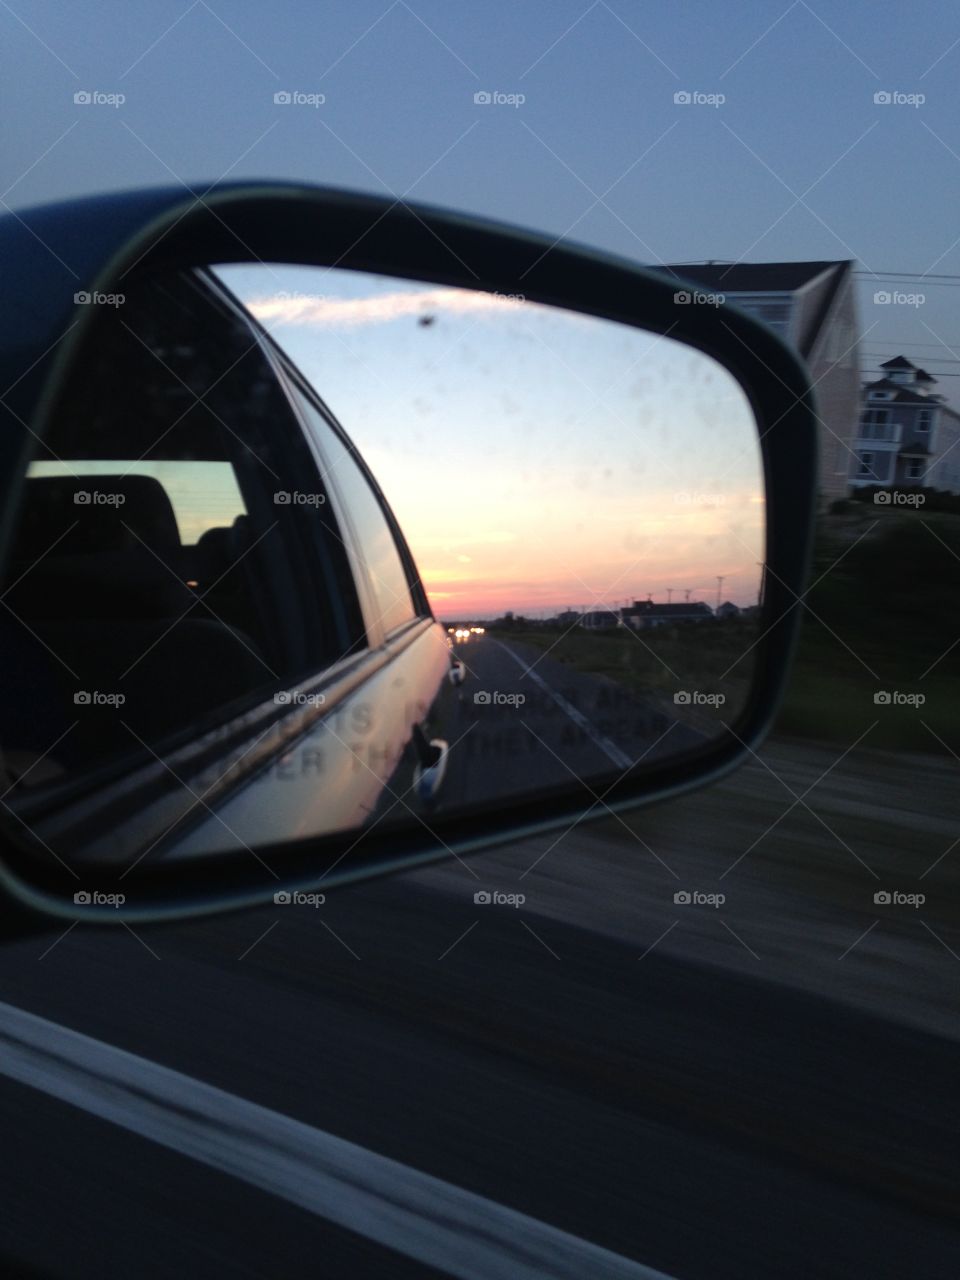 Sunset reflected in the rear view mirror of a car